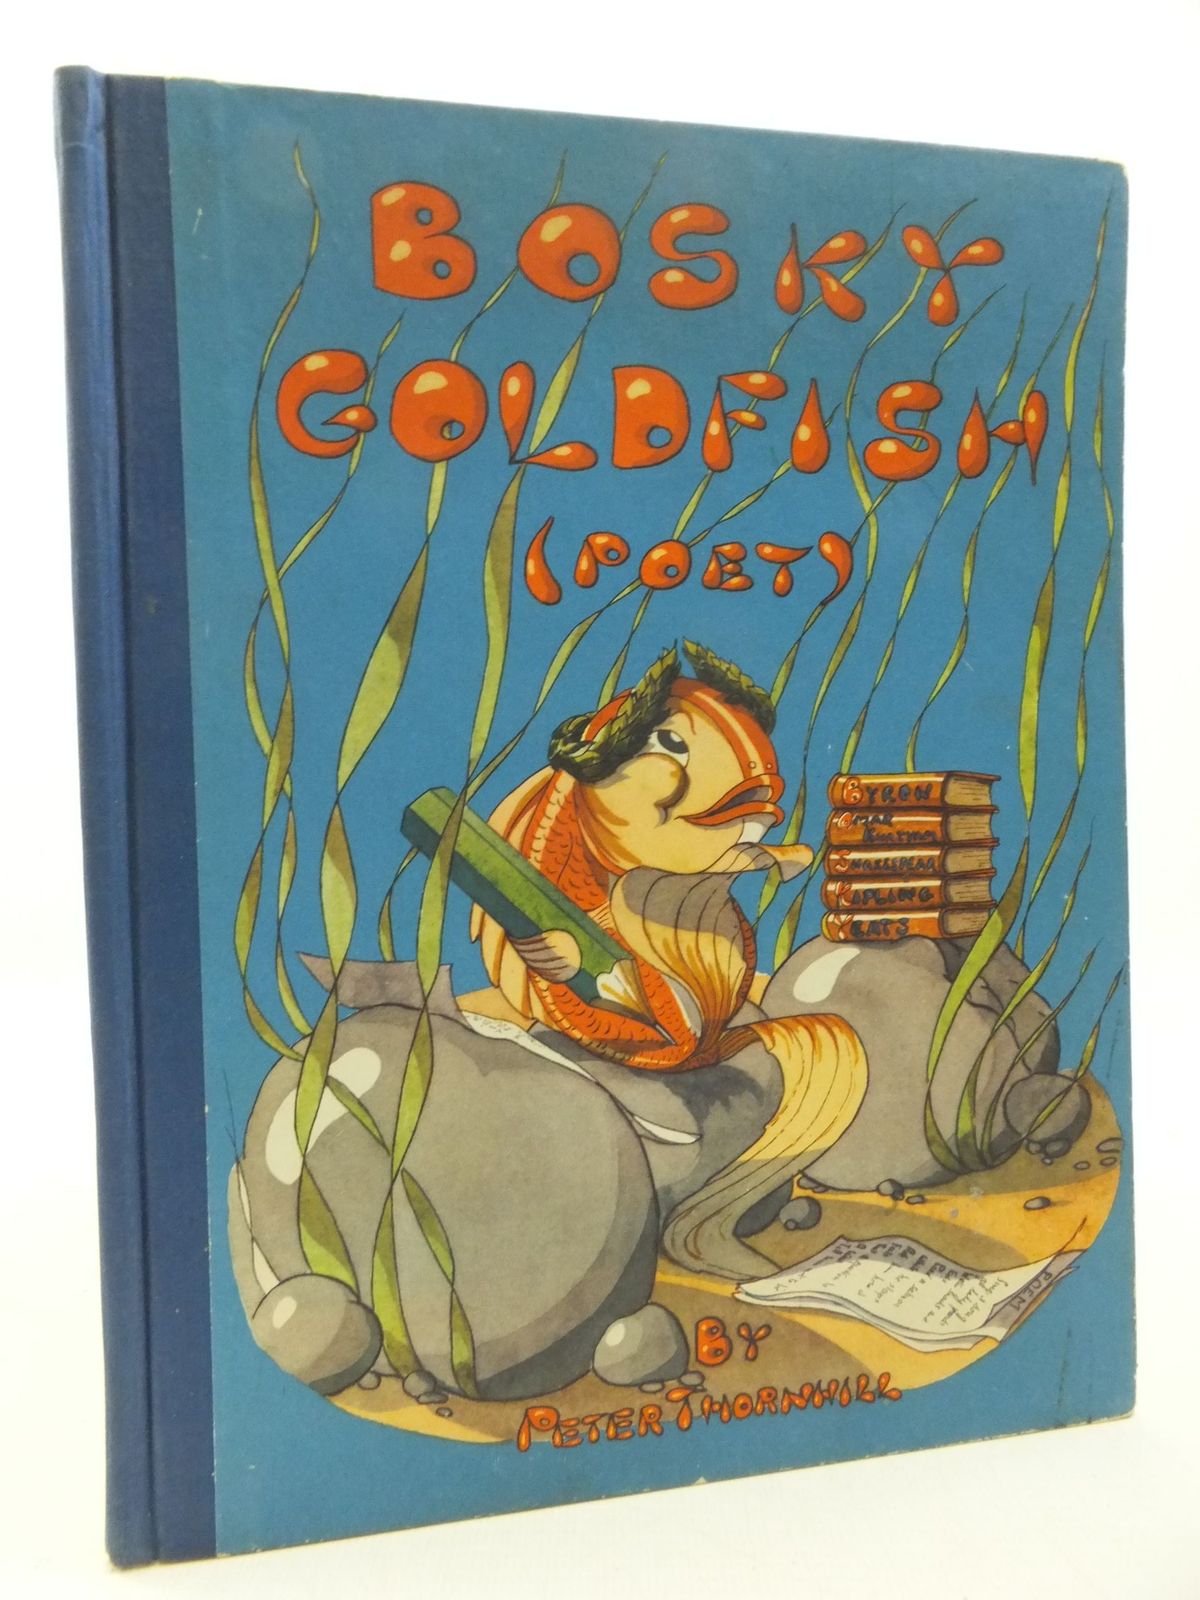 Photo of BOSKY GOLDFISH (POET) written by Thornhill, Peter published by George G. Harrap & Co. Ltd. (STOCK CODE: 2112172)  for sale by Stella & Rose's Books